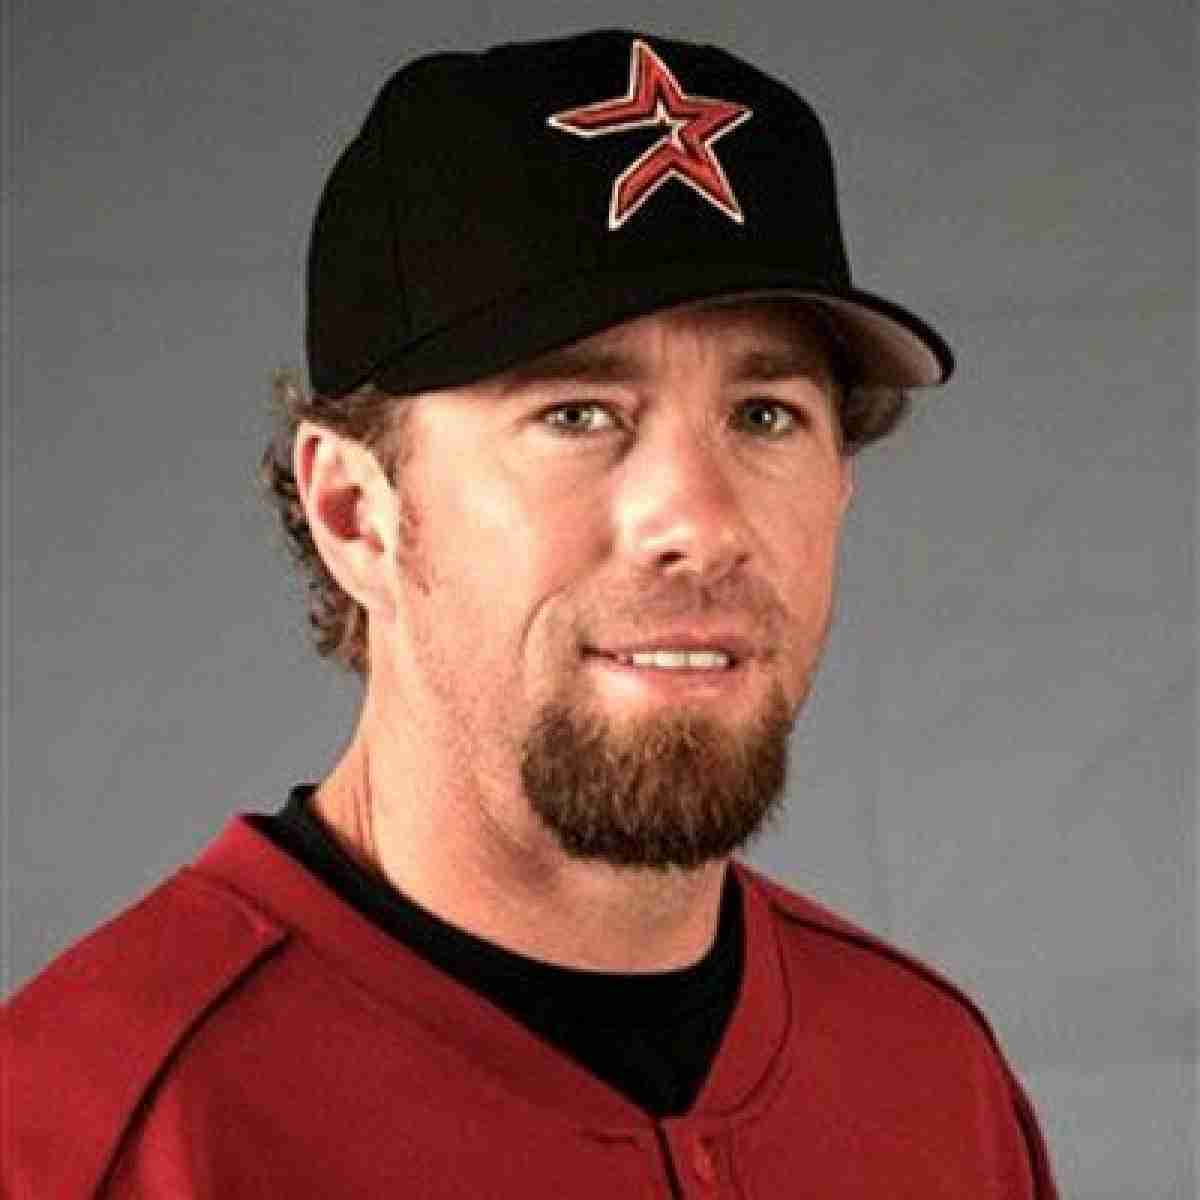 Not in Hall of Fame - 1. Jeff Bagwell